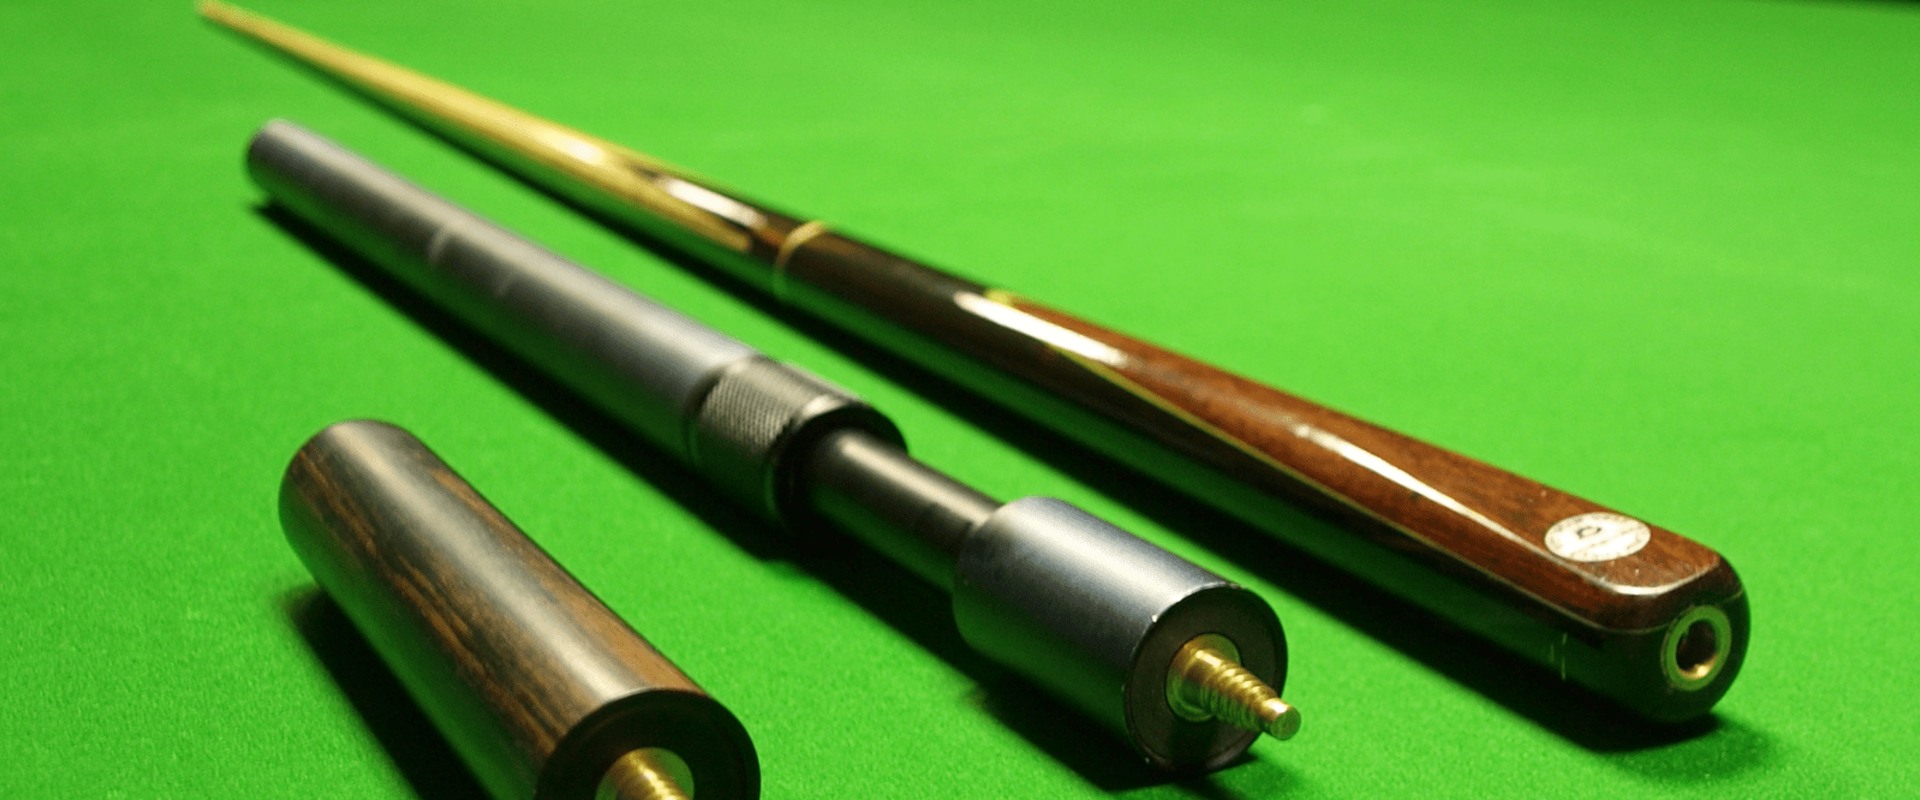 What weight pool cue do most pros use?